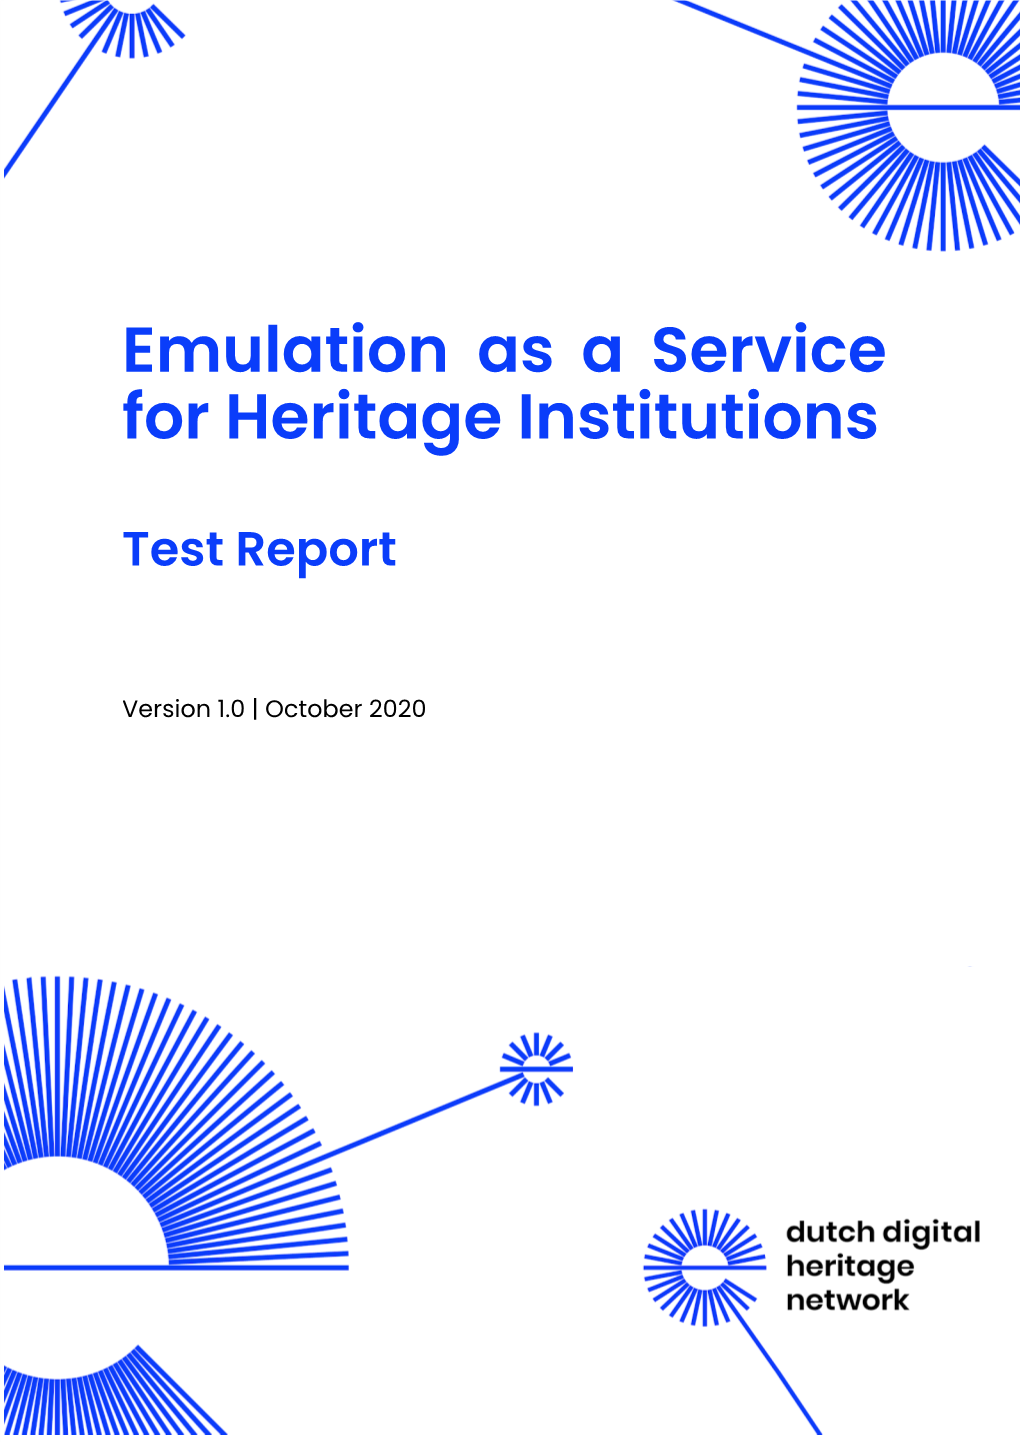 Emulation As a Service for Heritage Institutions